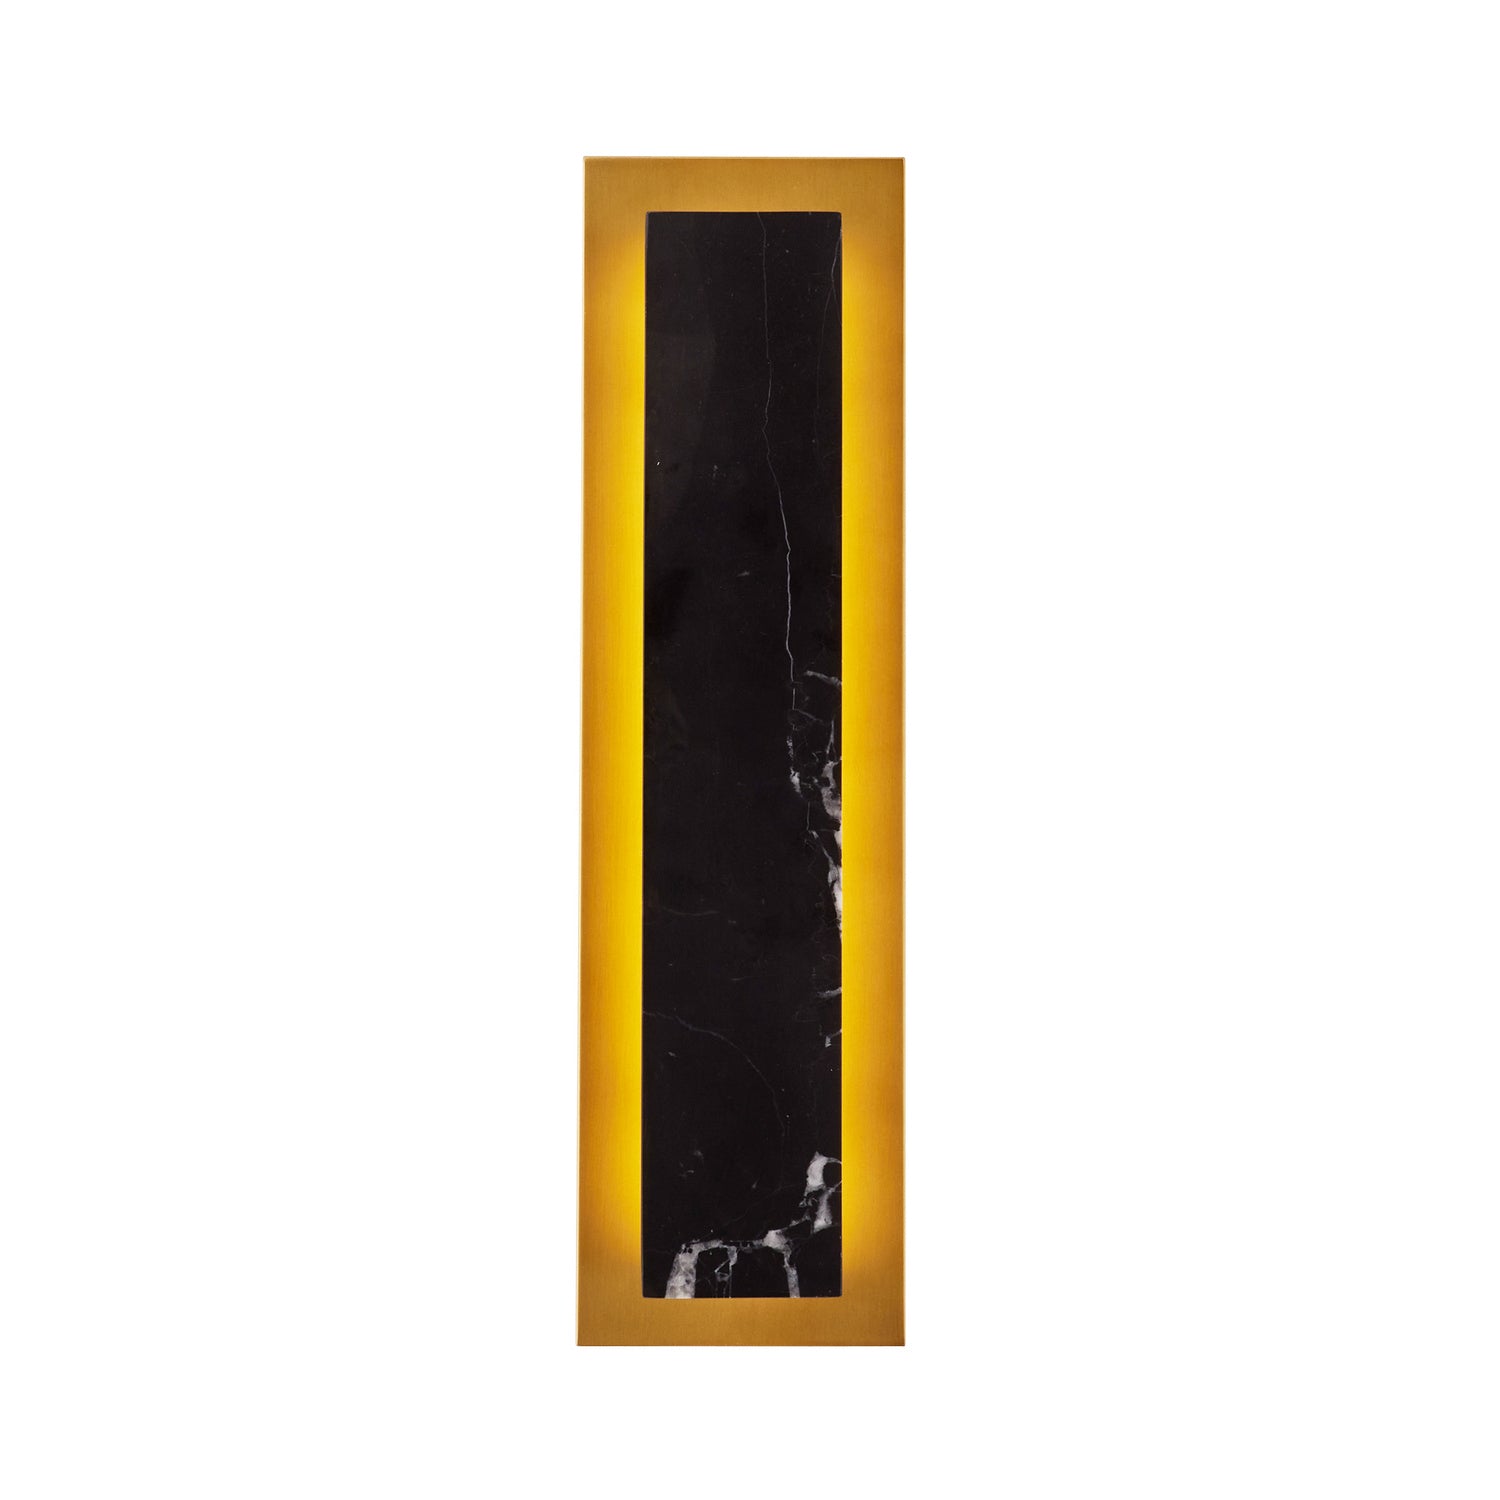 LED Wall Sconce from the Ozona collection in Black finish